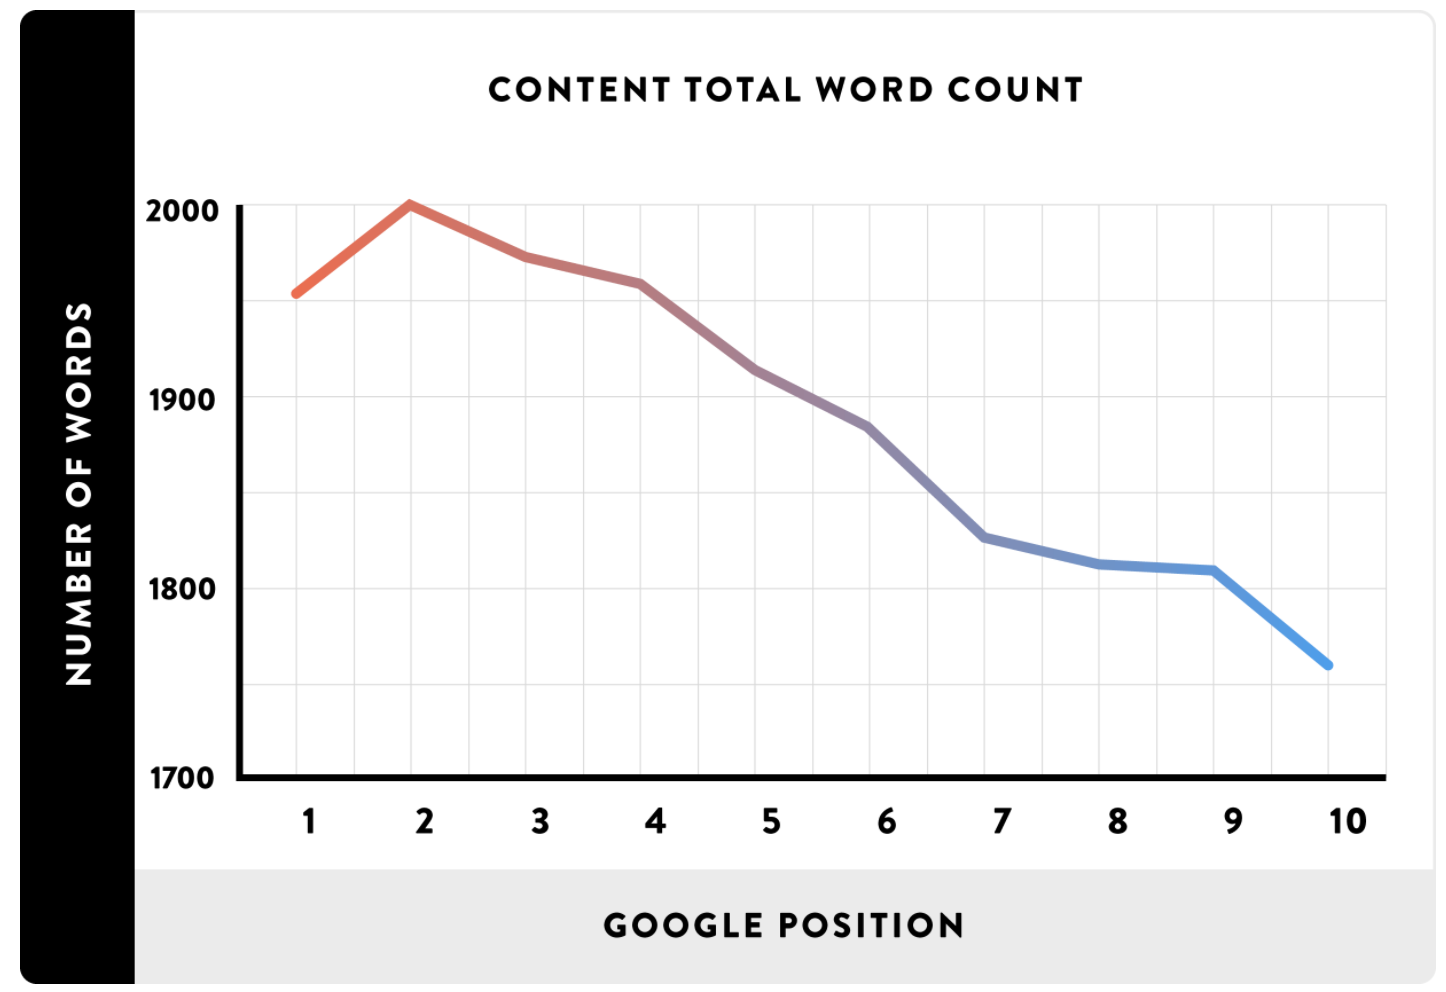 Graph showing content total word count